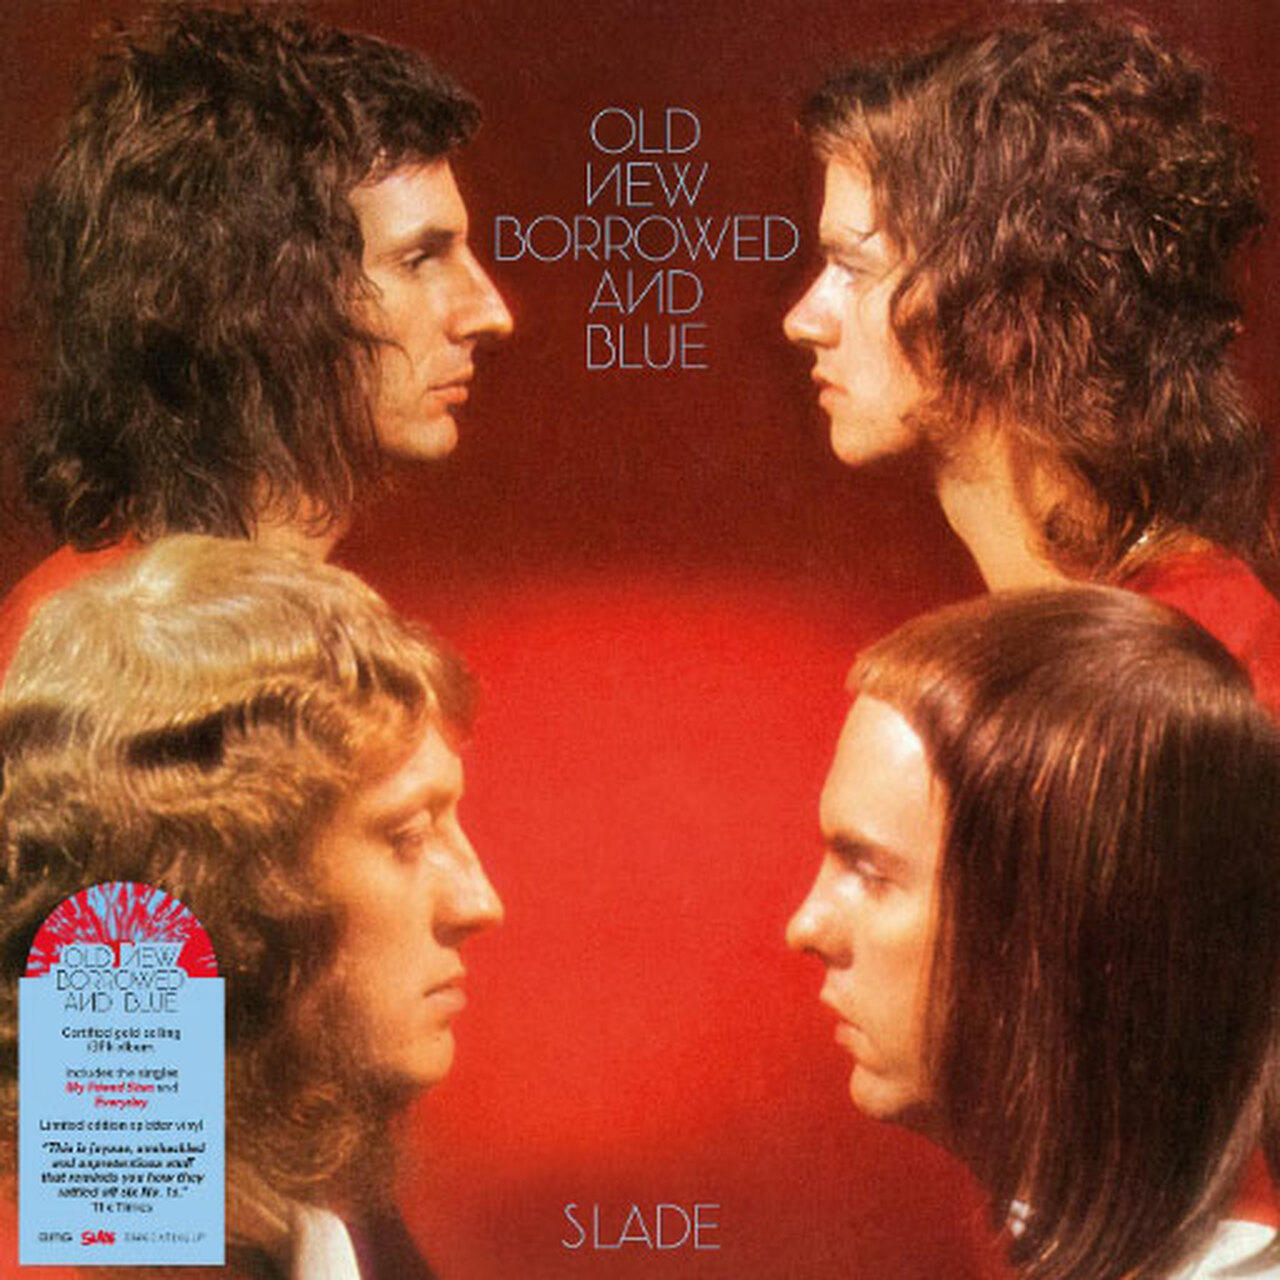 (Vinyl) - Blue Slade New - Borrowed and Old